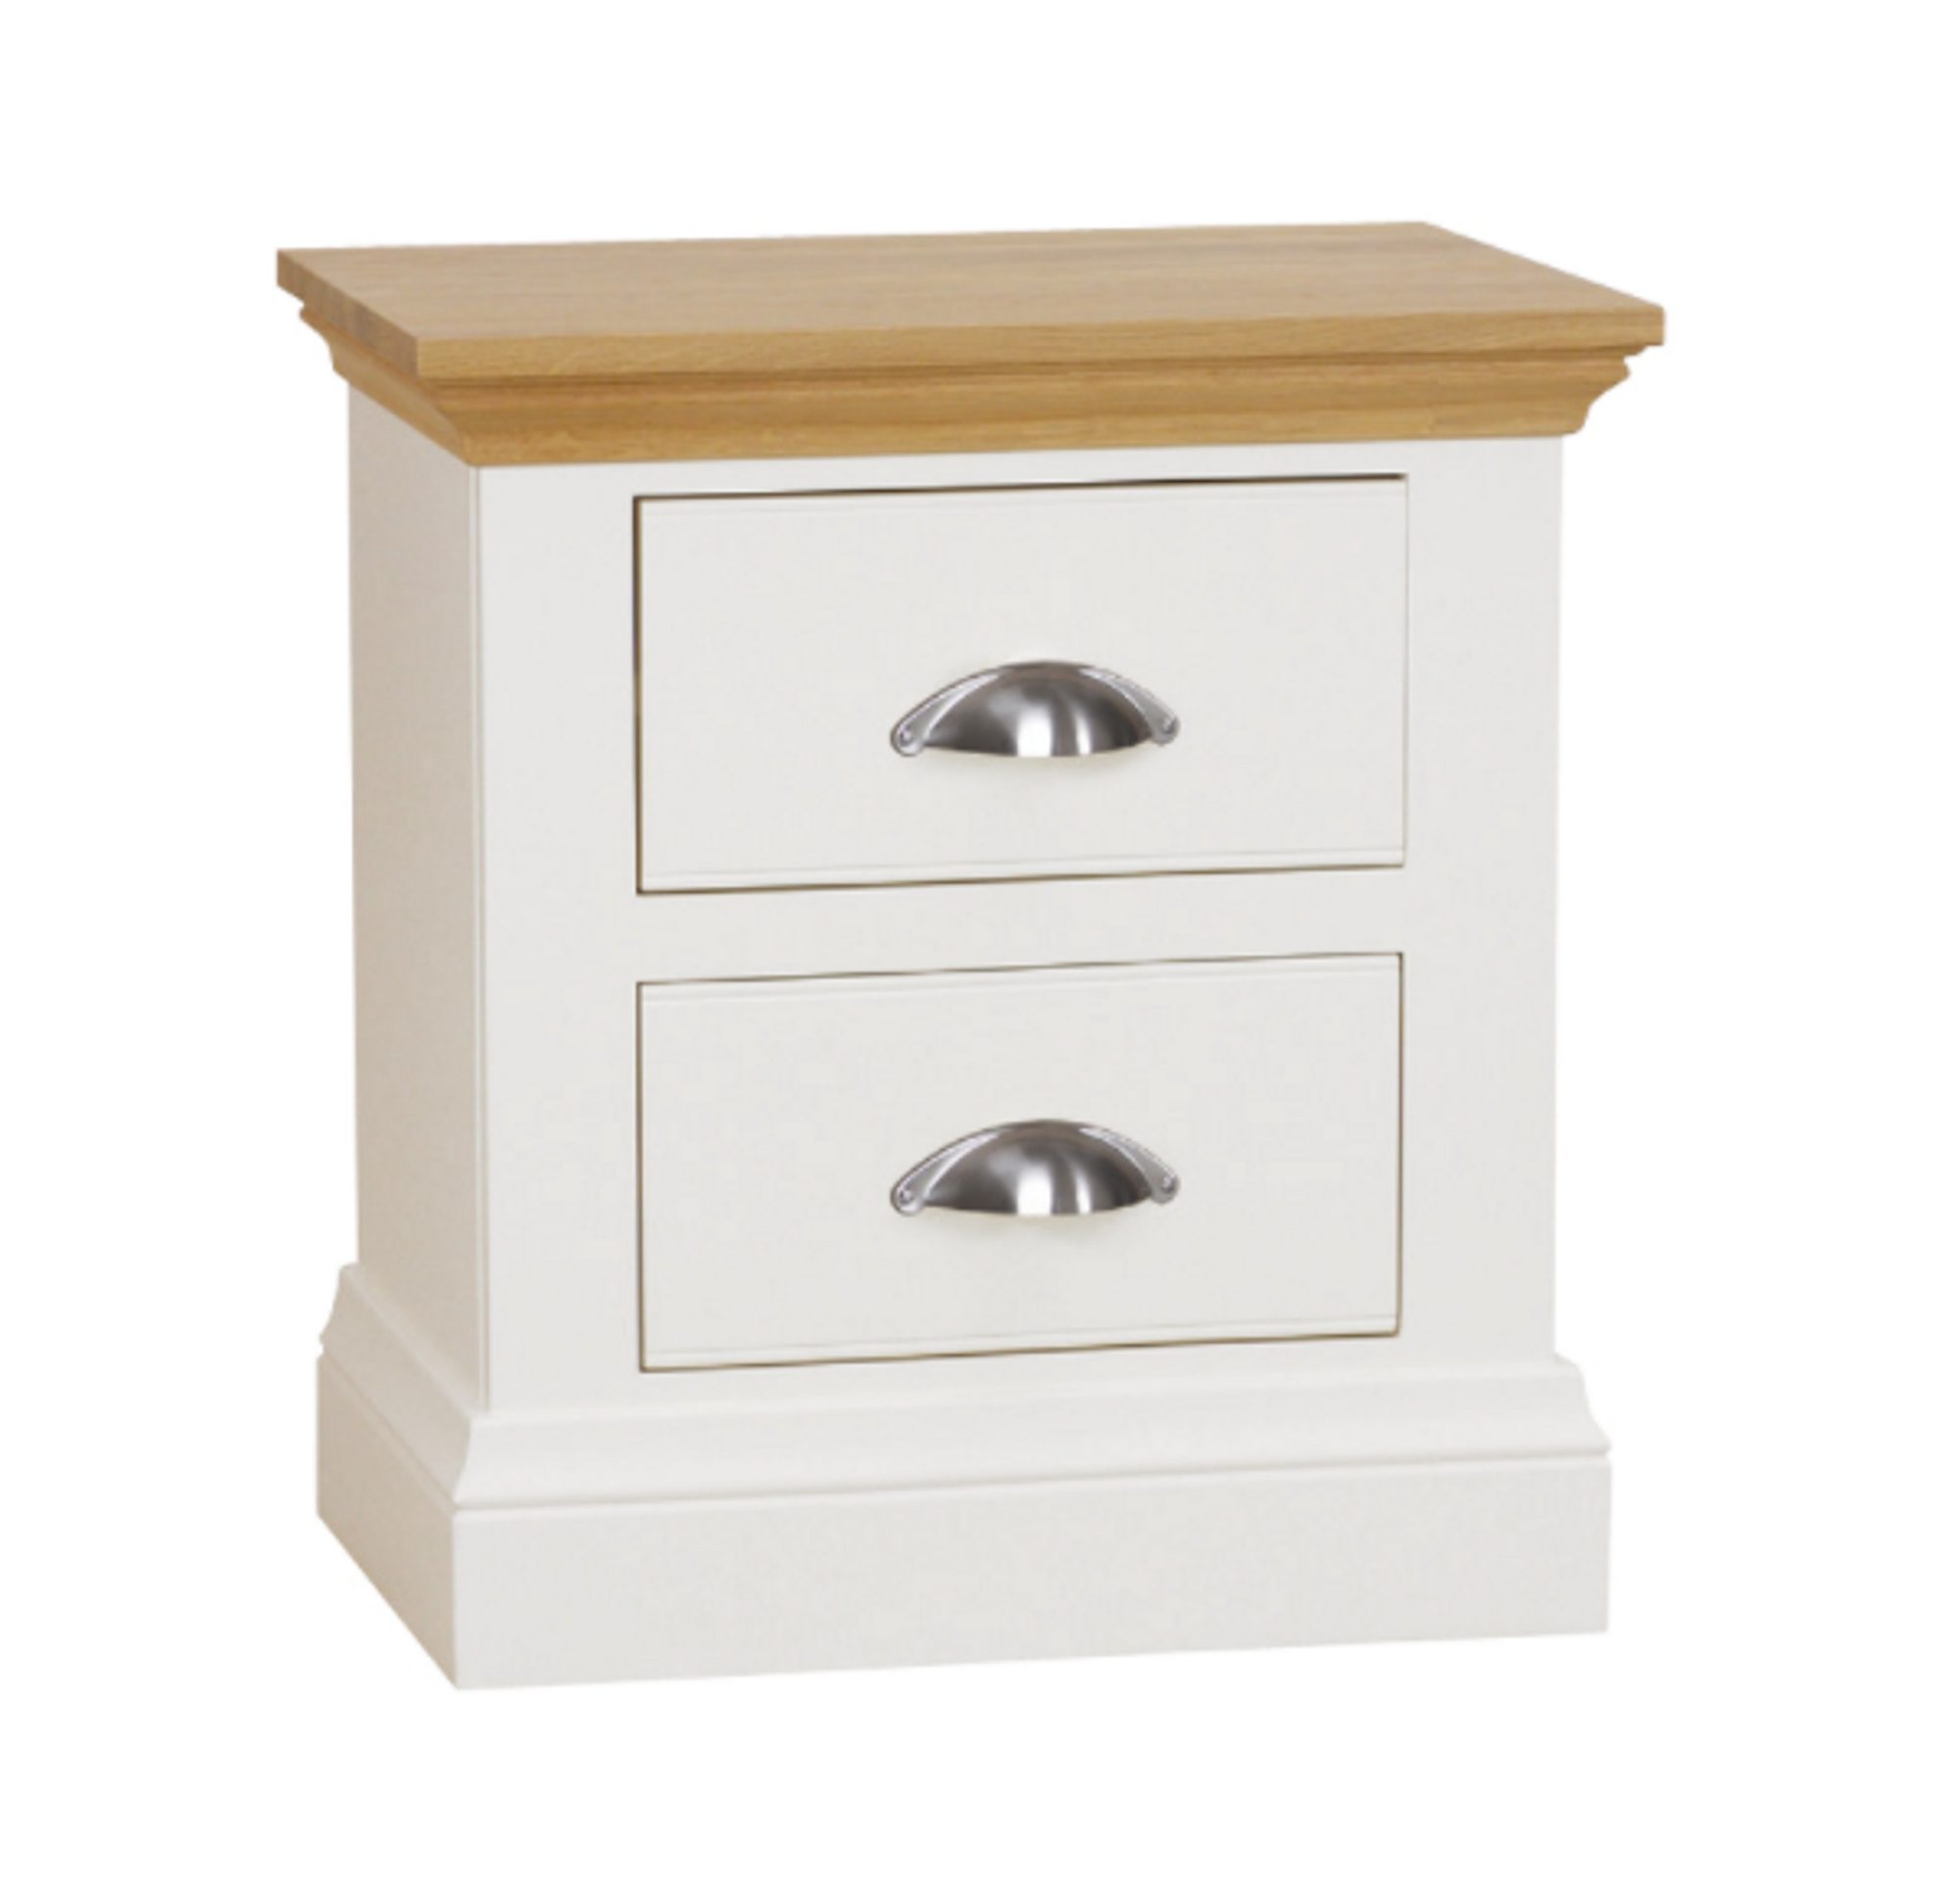 TCH Furniture Coelo Oak & Painted 2 Drawers Deep Bedside Chest ...